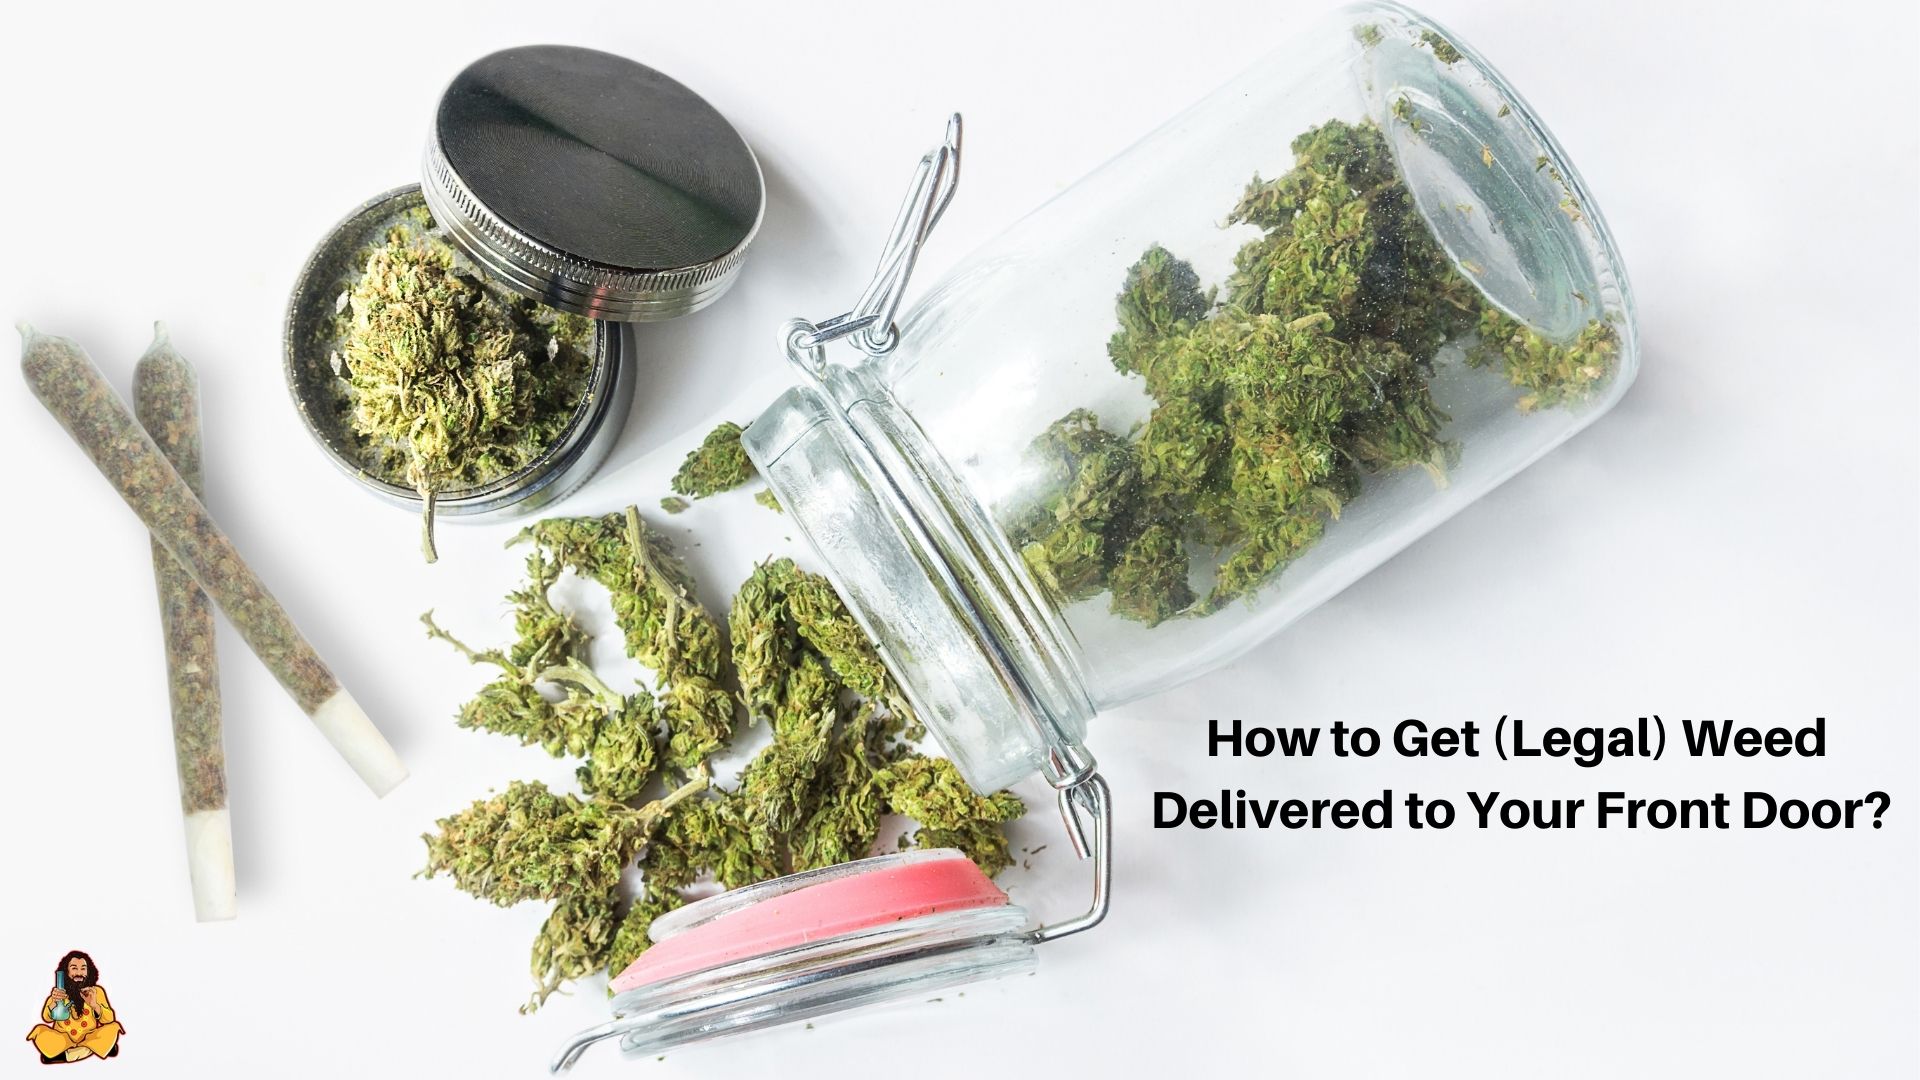 Legally Get Weed Delivered to Your Front Door